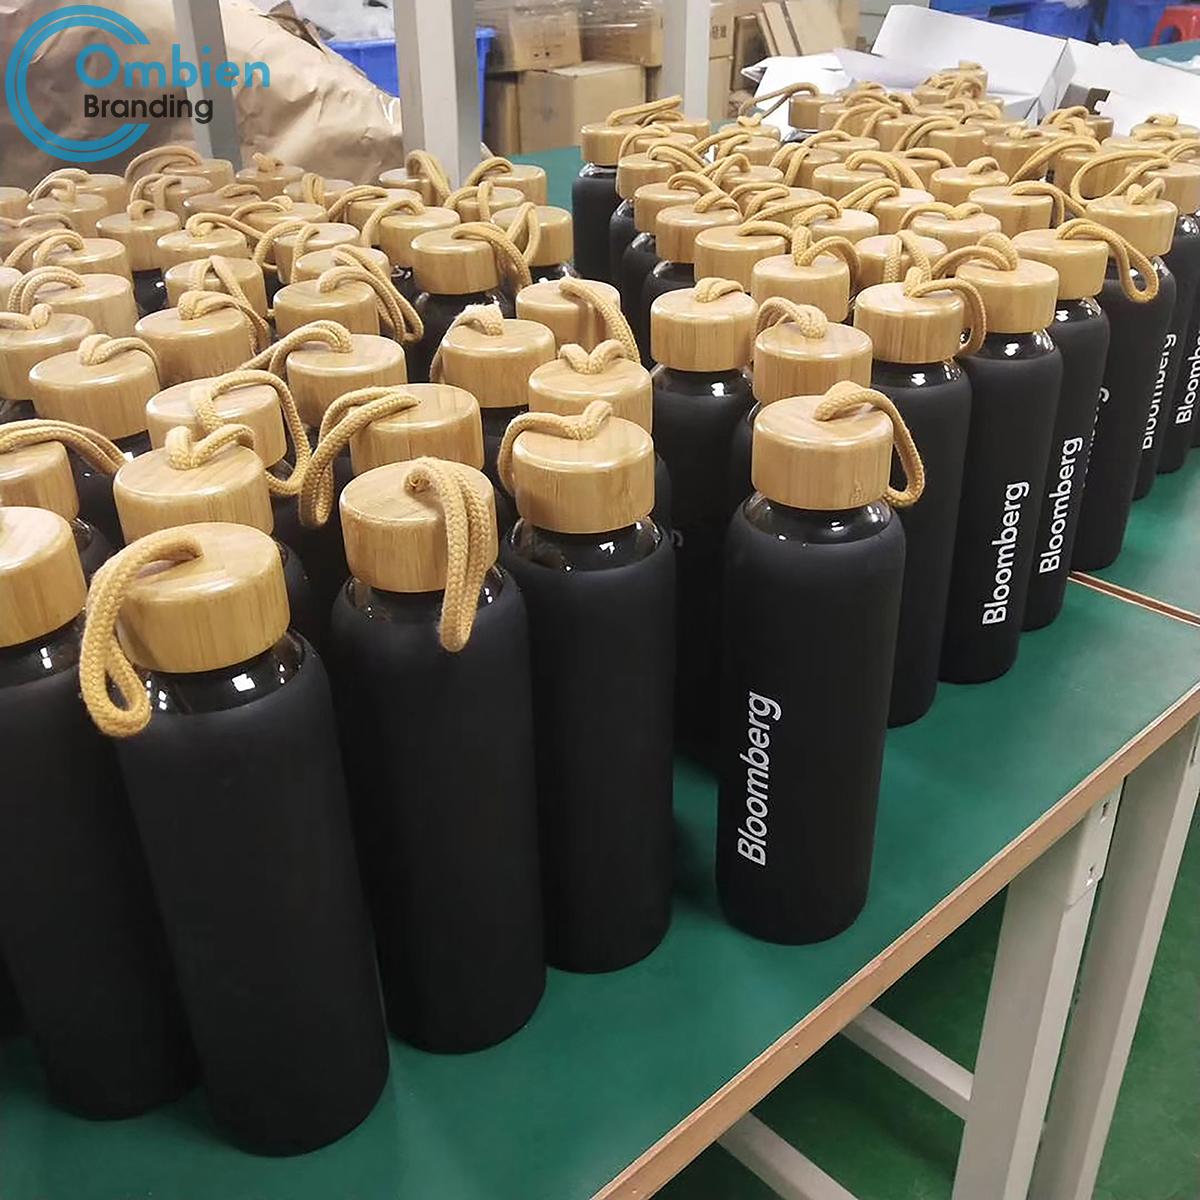 H69397 Glass bottle with  Silicone Sleeve